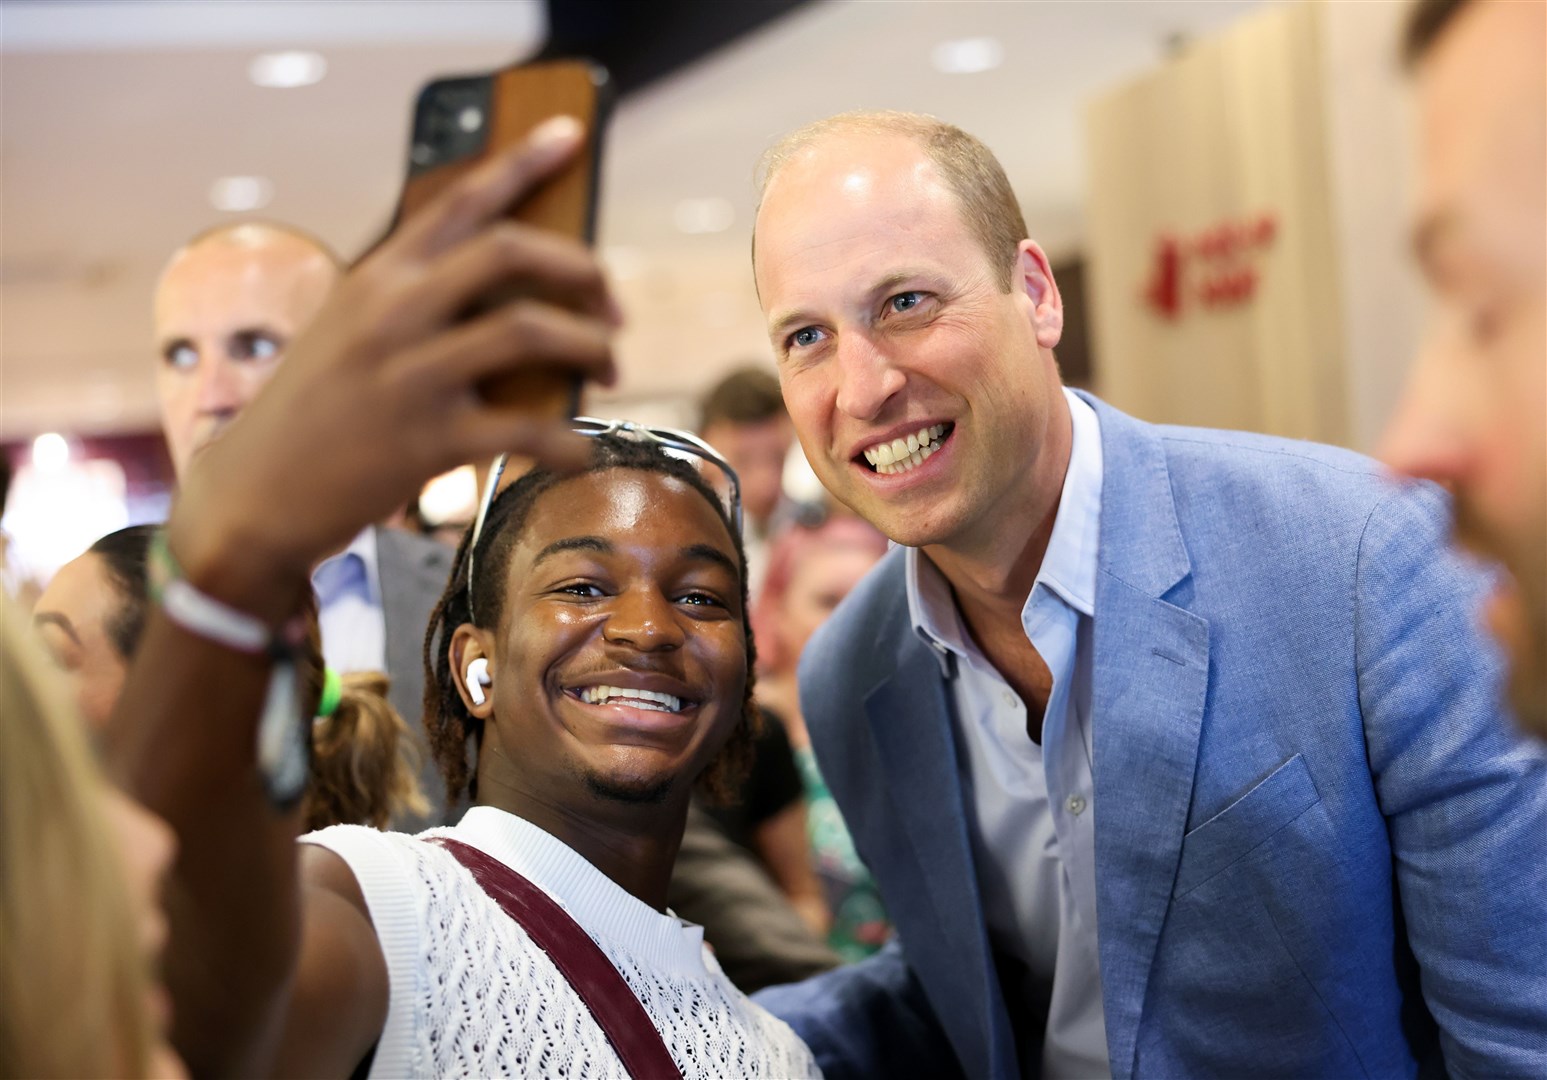 The Prince of Wales poses for a selfie at Pret A Manger in Bournemouth (Chris Jackson/PA)